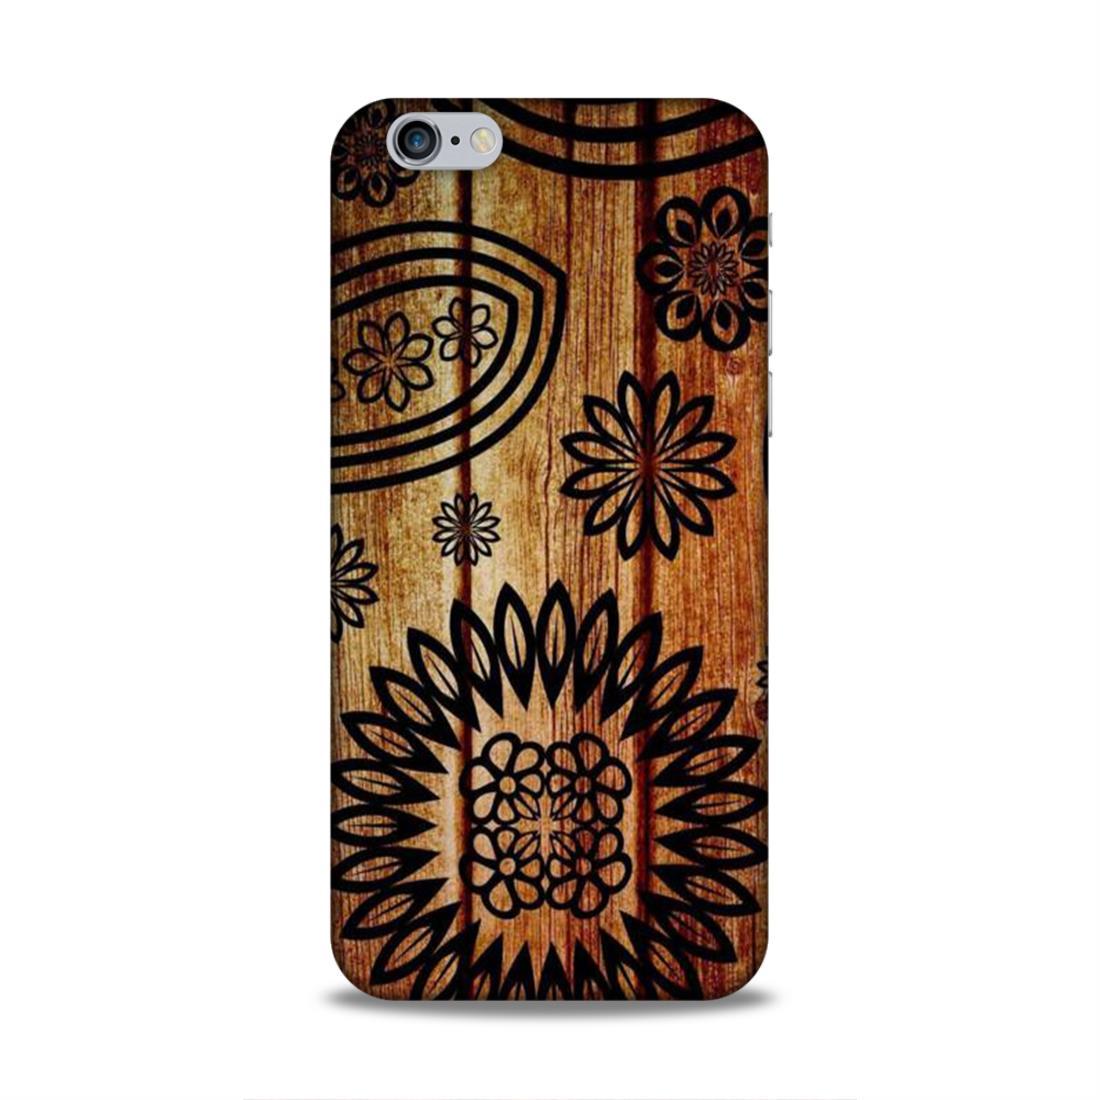 Wooden Look Pattern iPhone 6 Mobile Case Cover